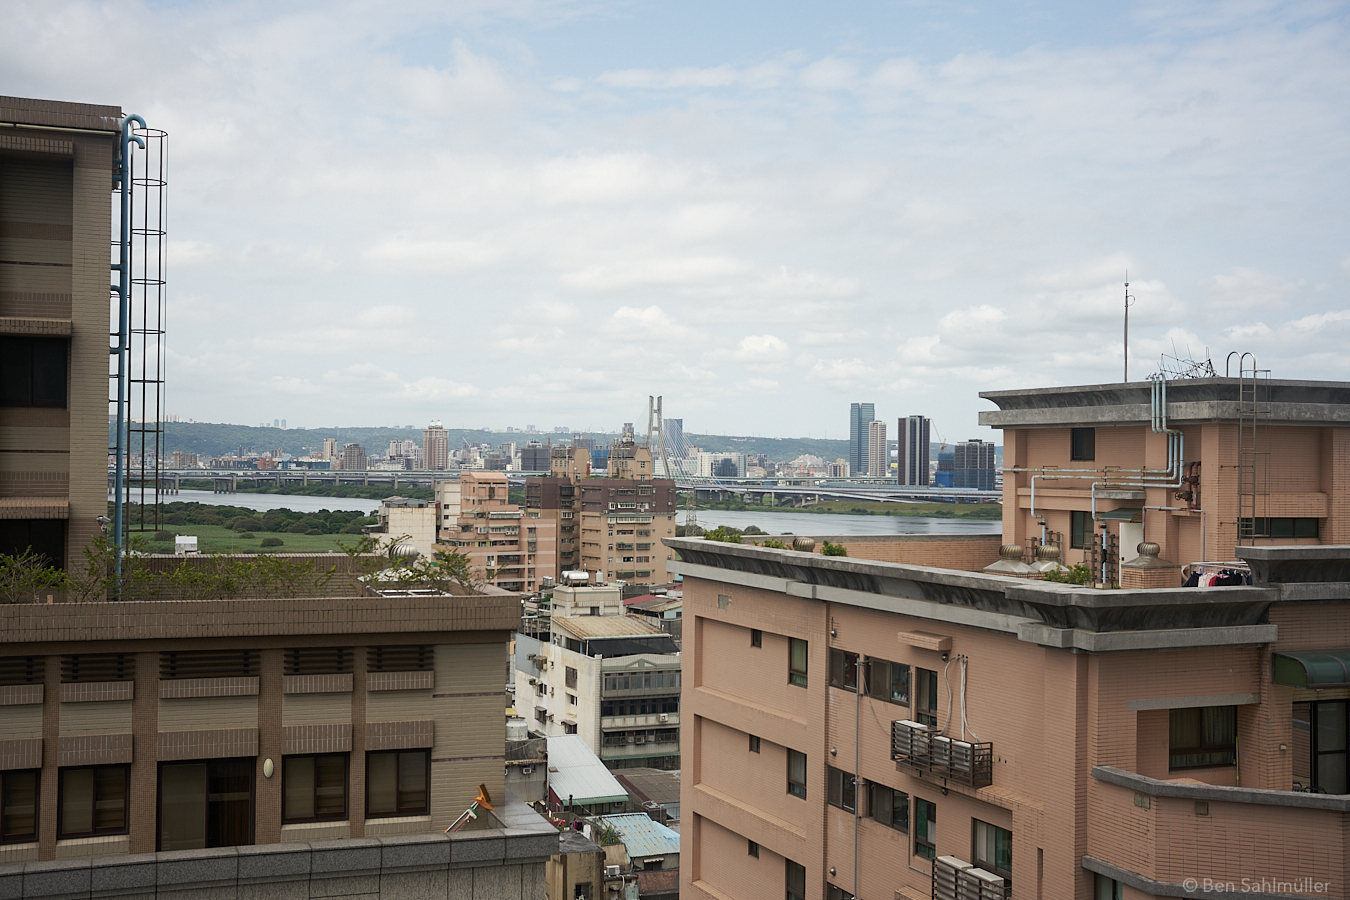 The view from a high rise. The sky is friendly and blue, there are lush mountain ranges in the distance and a river can be seen. Yet, all this is concealed by other high rises close to the window and feels out of reach.